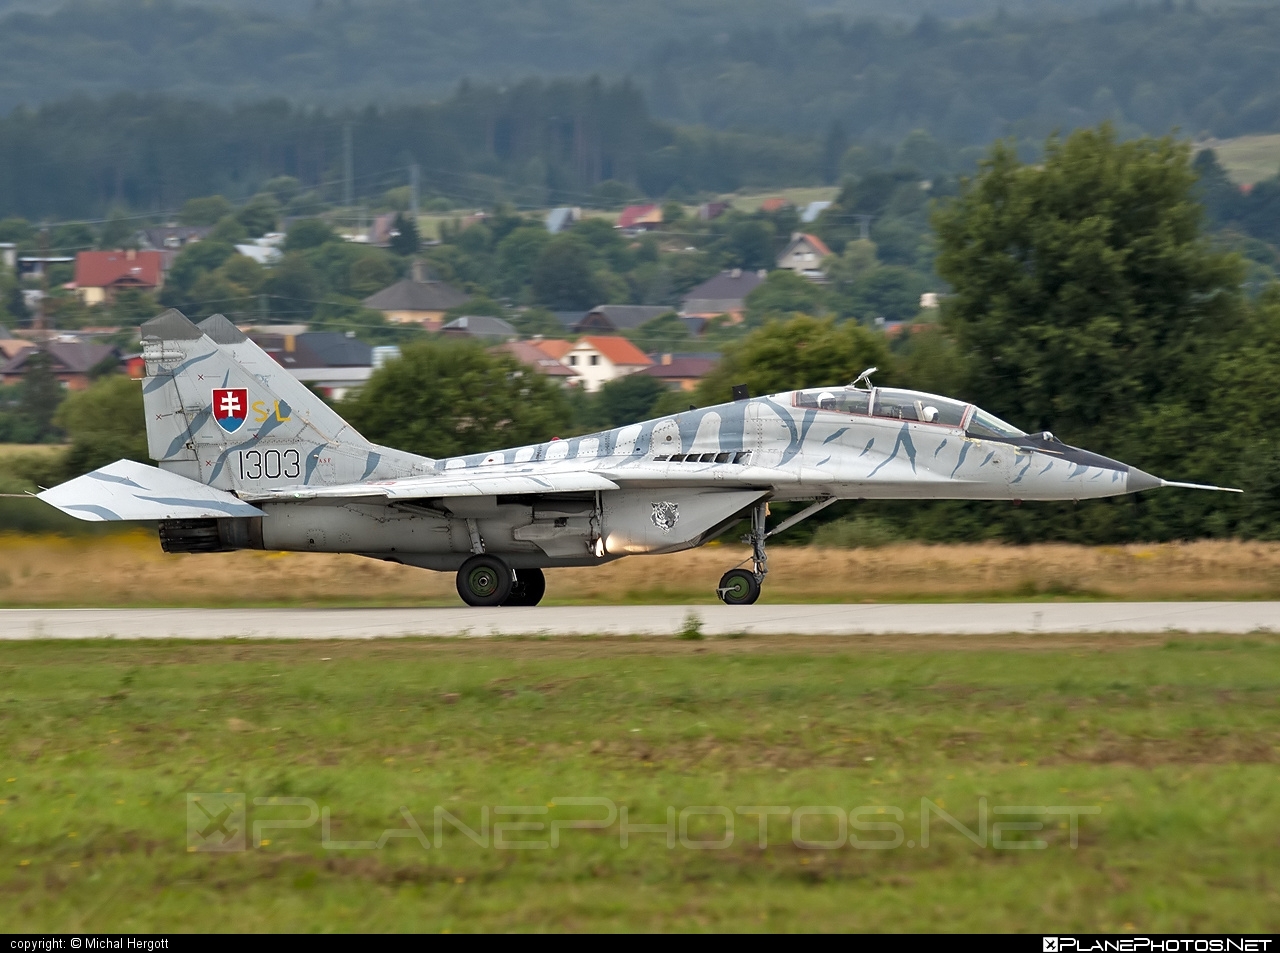 Mikoyan-Gurevich MiG-29UBS - 1303 operated by Vzdušné sily OS SR (Slovak Air Force) #mig #mig29 #mig29ubs #mikoyangurevich #slovakairforce #vzdusnesilyossr